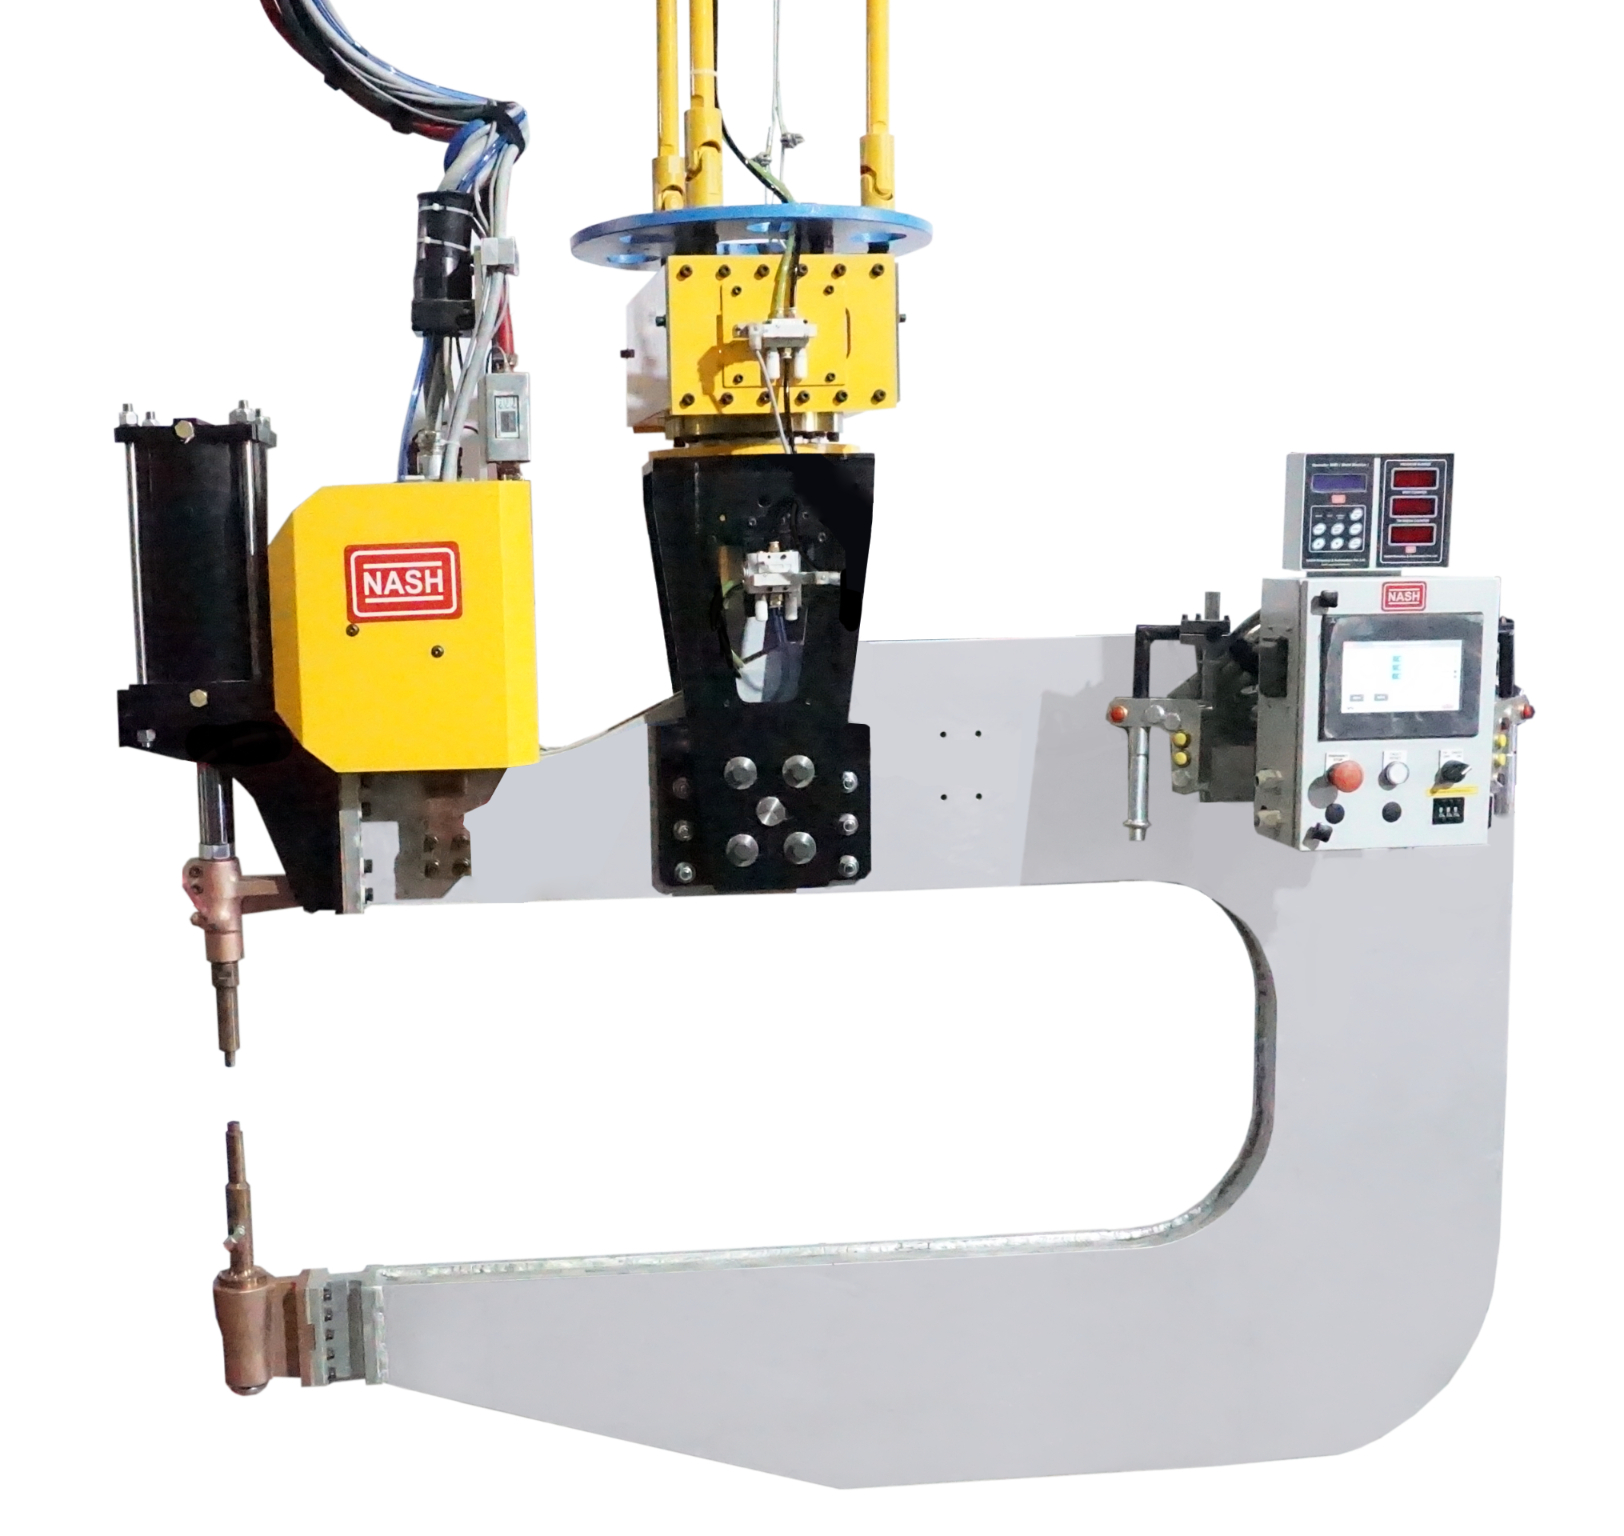 C-Type MFDC IT Gun for Metro Underframe Spot Welding (TD-1520mm, TG-550mm, Tip Force-1100 Kgf) mounted on a 4-Axis Manipulator